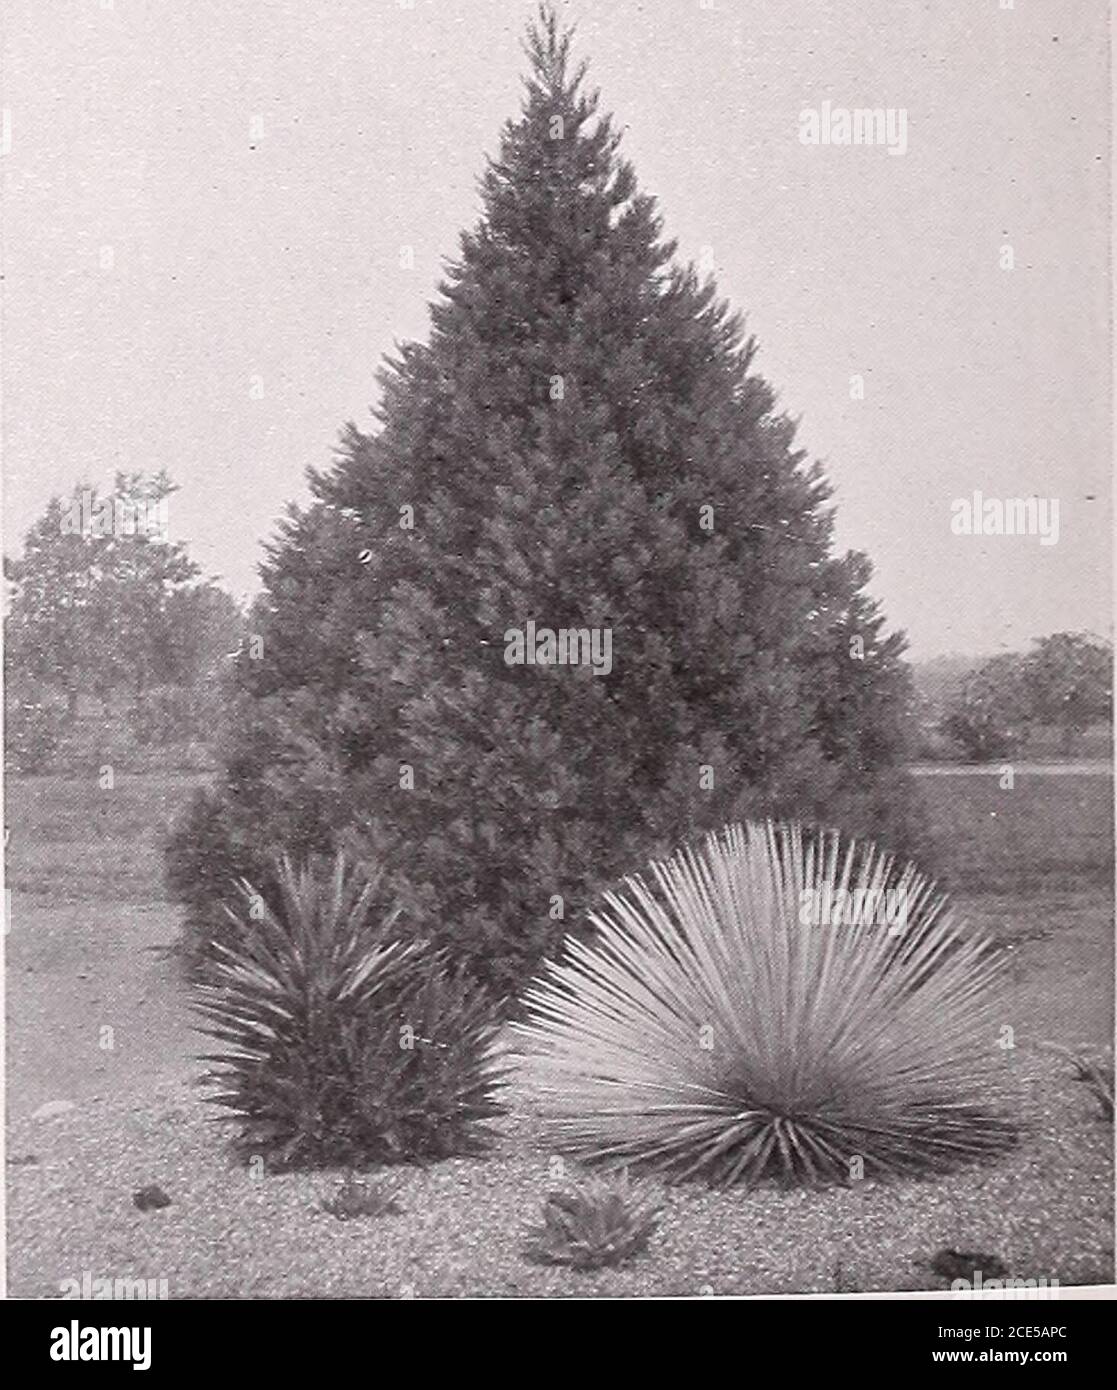 . Armstrong Nurseries . -turesque trees known. They form handsome specimens,and are unexcelled for avenue planting, park and gardeneffects. Balled or potted, 2 to 5 ft., at 75c per foot. Sequoia gigantea. California Big Tree. The largestand oldest of all trees. These handsome trees are of per-fect symmetrical form, with thickly furnished branchesand foliage of bluish-green. Well may they be selectedfor the avenue, park or large lawn. Balled or potted, I tu2 ft., at $1.25 per foot. TAXUS. YewTaxus hibernica. Irish Yew. A remarkably compactshrub of upright habit; the glossy dark green leaves are Stock Photo